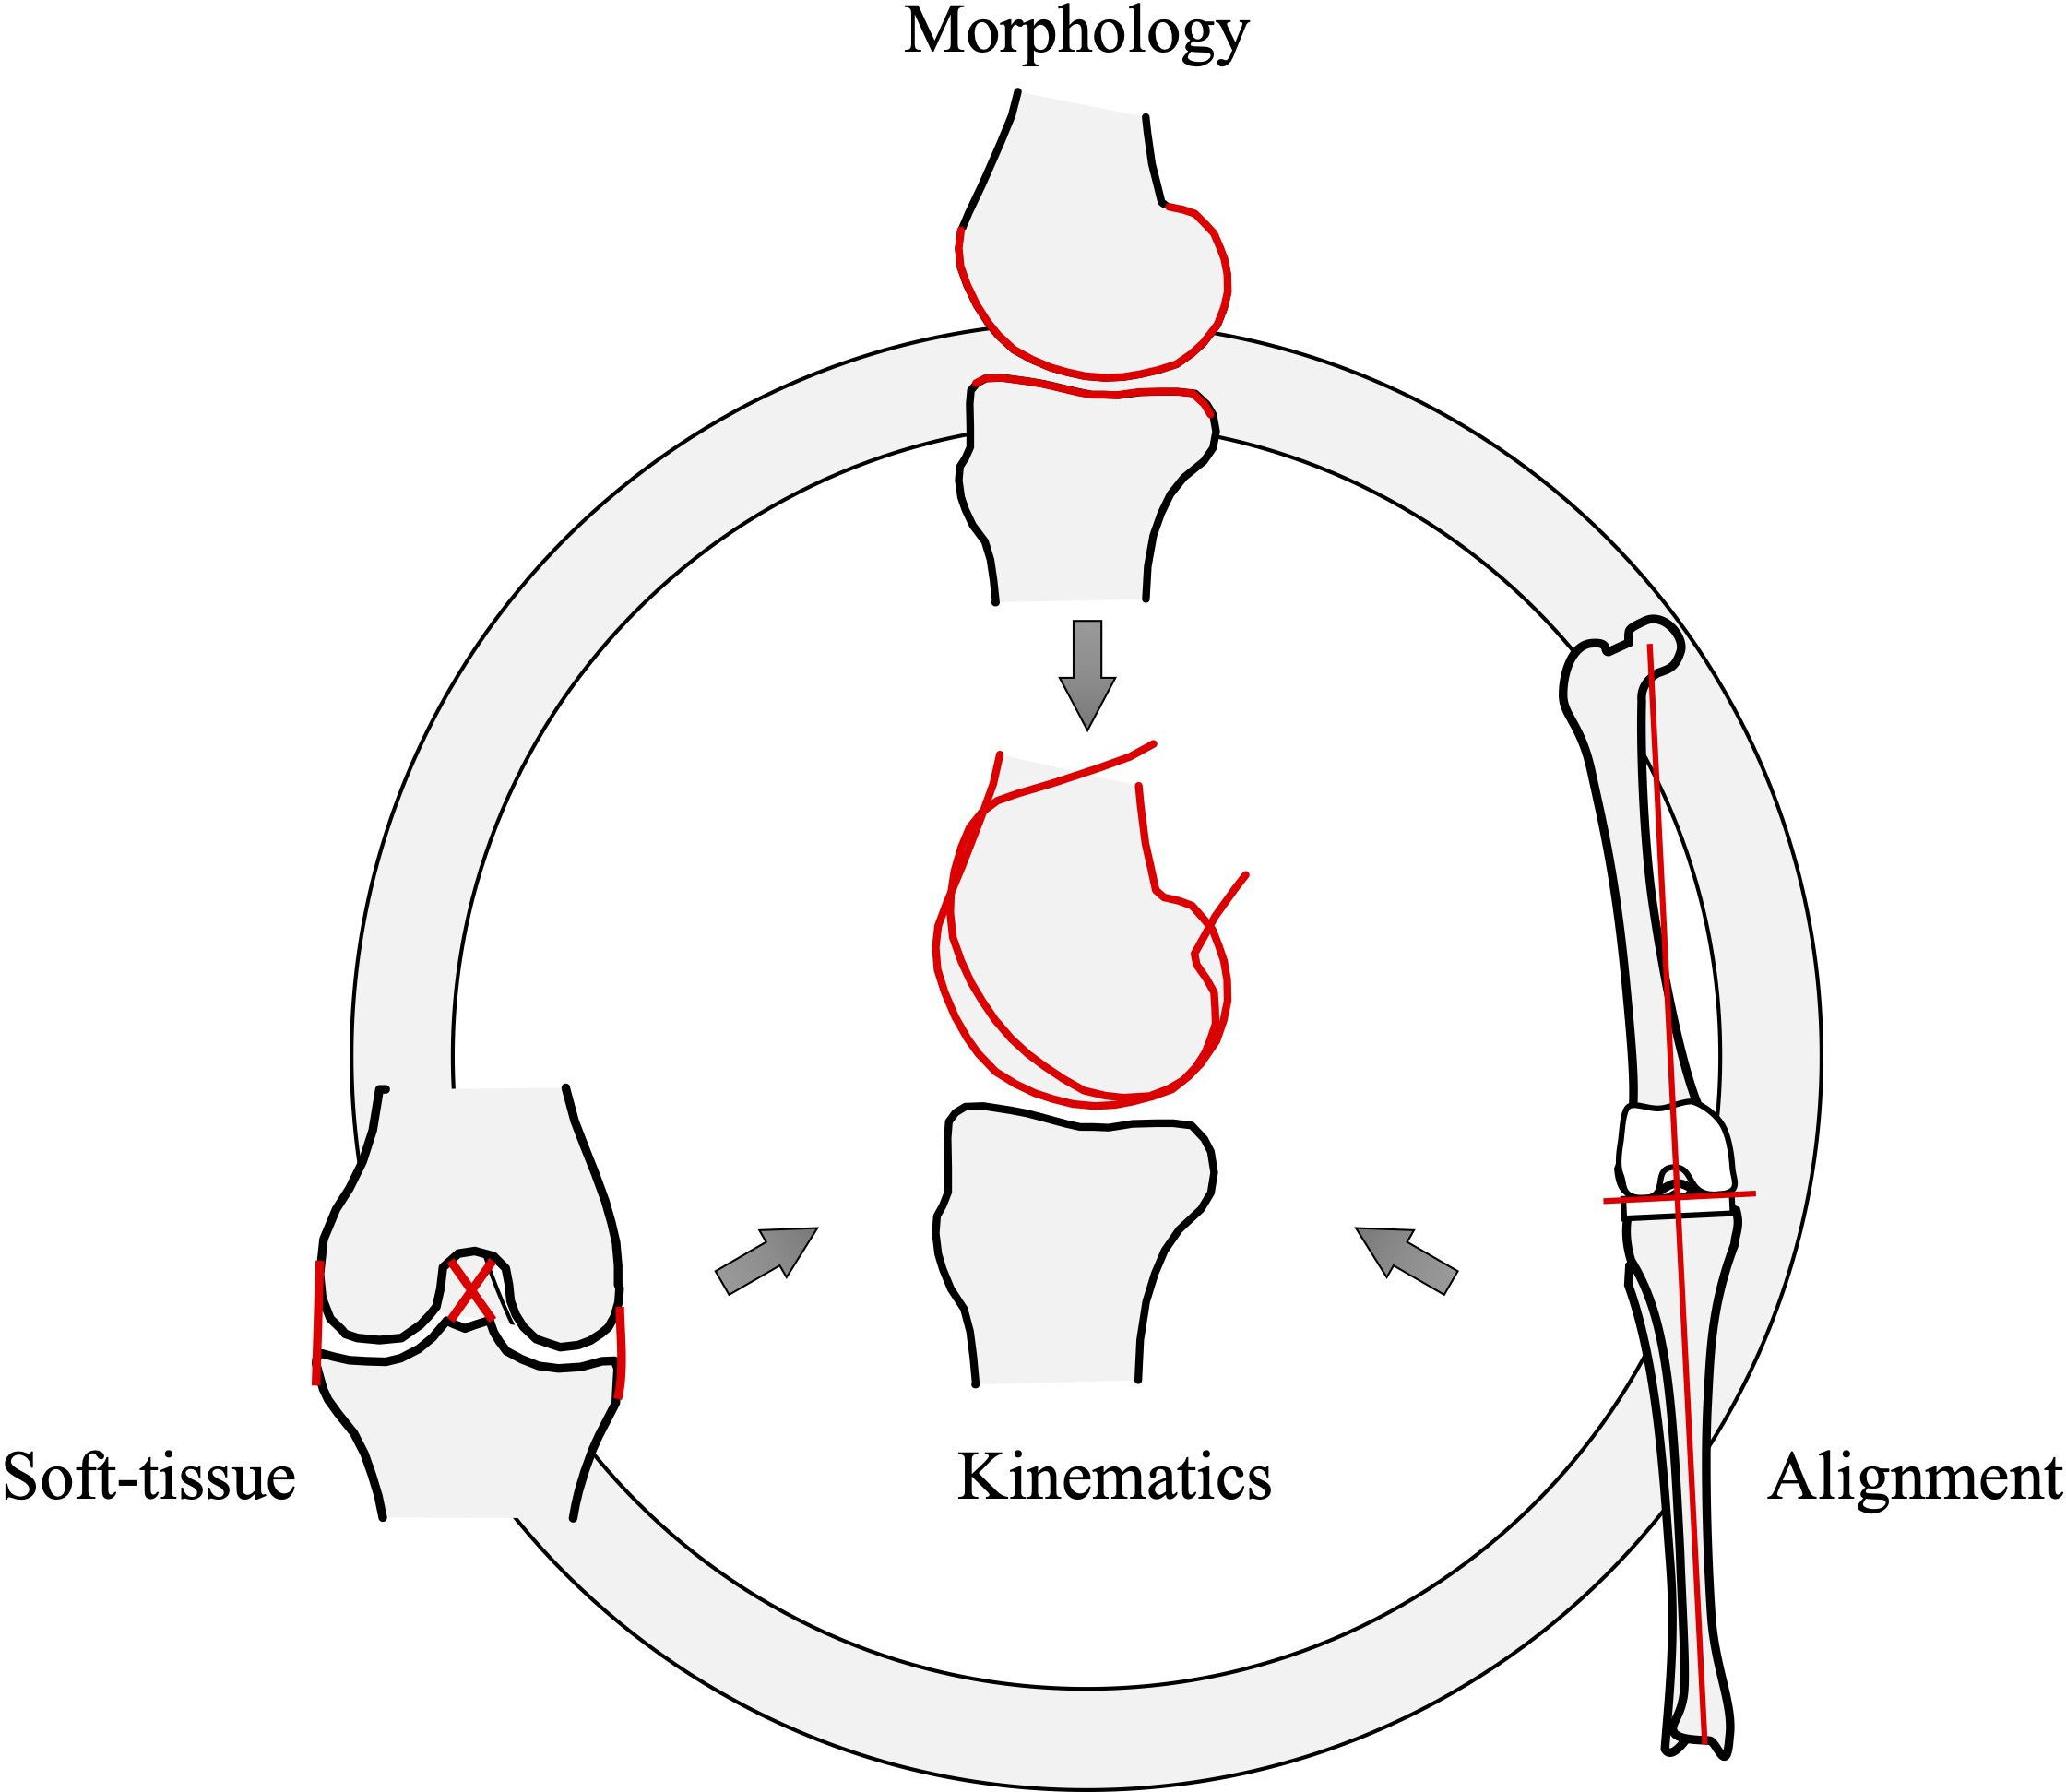 Fig. 4 
            Three fundamental knee elements; morphology, alignment, and soft-tissue. Each element determines and is determined by the other two elements, creating the best harmony on an individual basis. As a result of this harmony, the individualized kinematics are provided. The mechanical approach tends to change all, while the kinematic approach aims to reproduce all. However, the starting point is different among the respective kinematic alignment (KA) approaches. The calipered approach starts from ‘morphology’, focusing on replicating the original articular surface. The soft-tissue respecting approach starts from the soft-tissue balance, and the restricted approach starts from the control of the alignment. All other elements are expected to be eventually overcome and the patients’ original kinematics will be restored. The functional alignment, inverse KA, and other computer-assisted approaches adjust all elements based on intraoperative measurements.
          